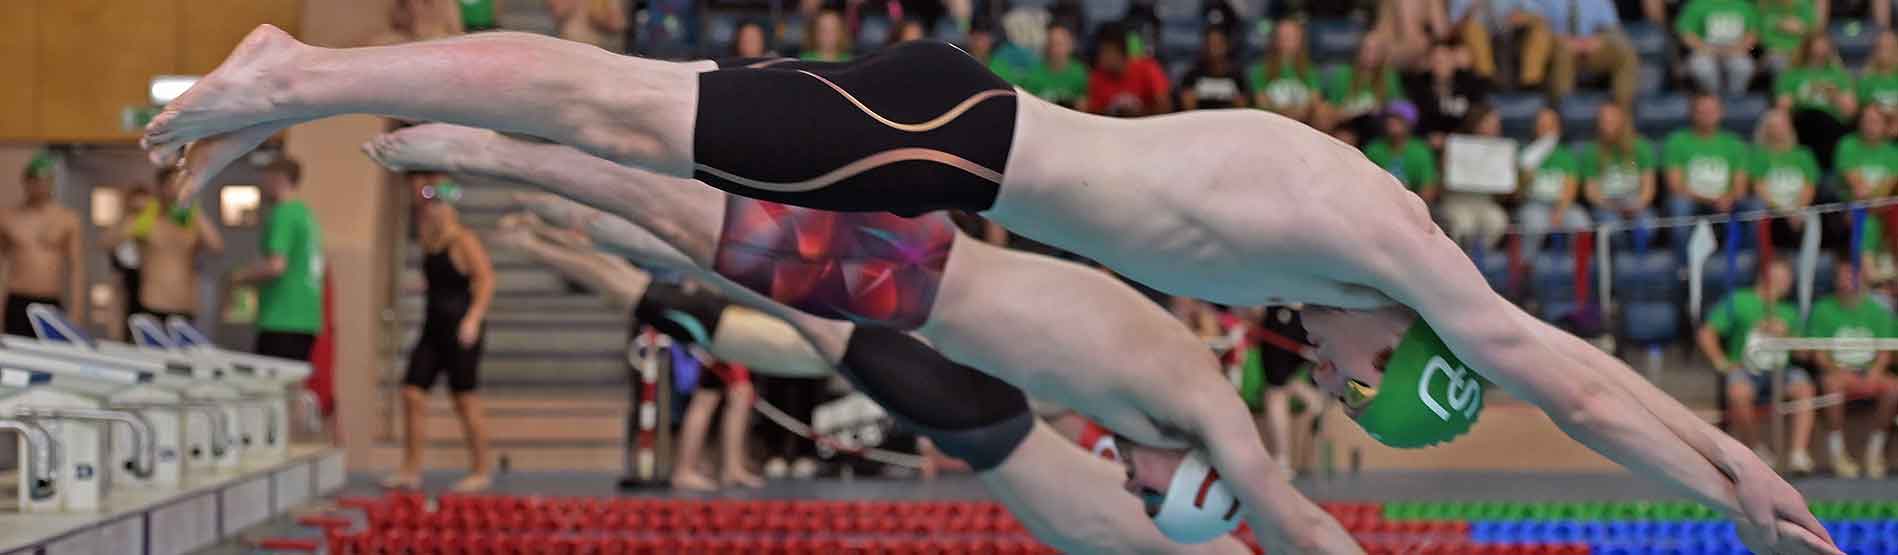 Swimmers diving into Wales National Pool during swimming competition